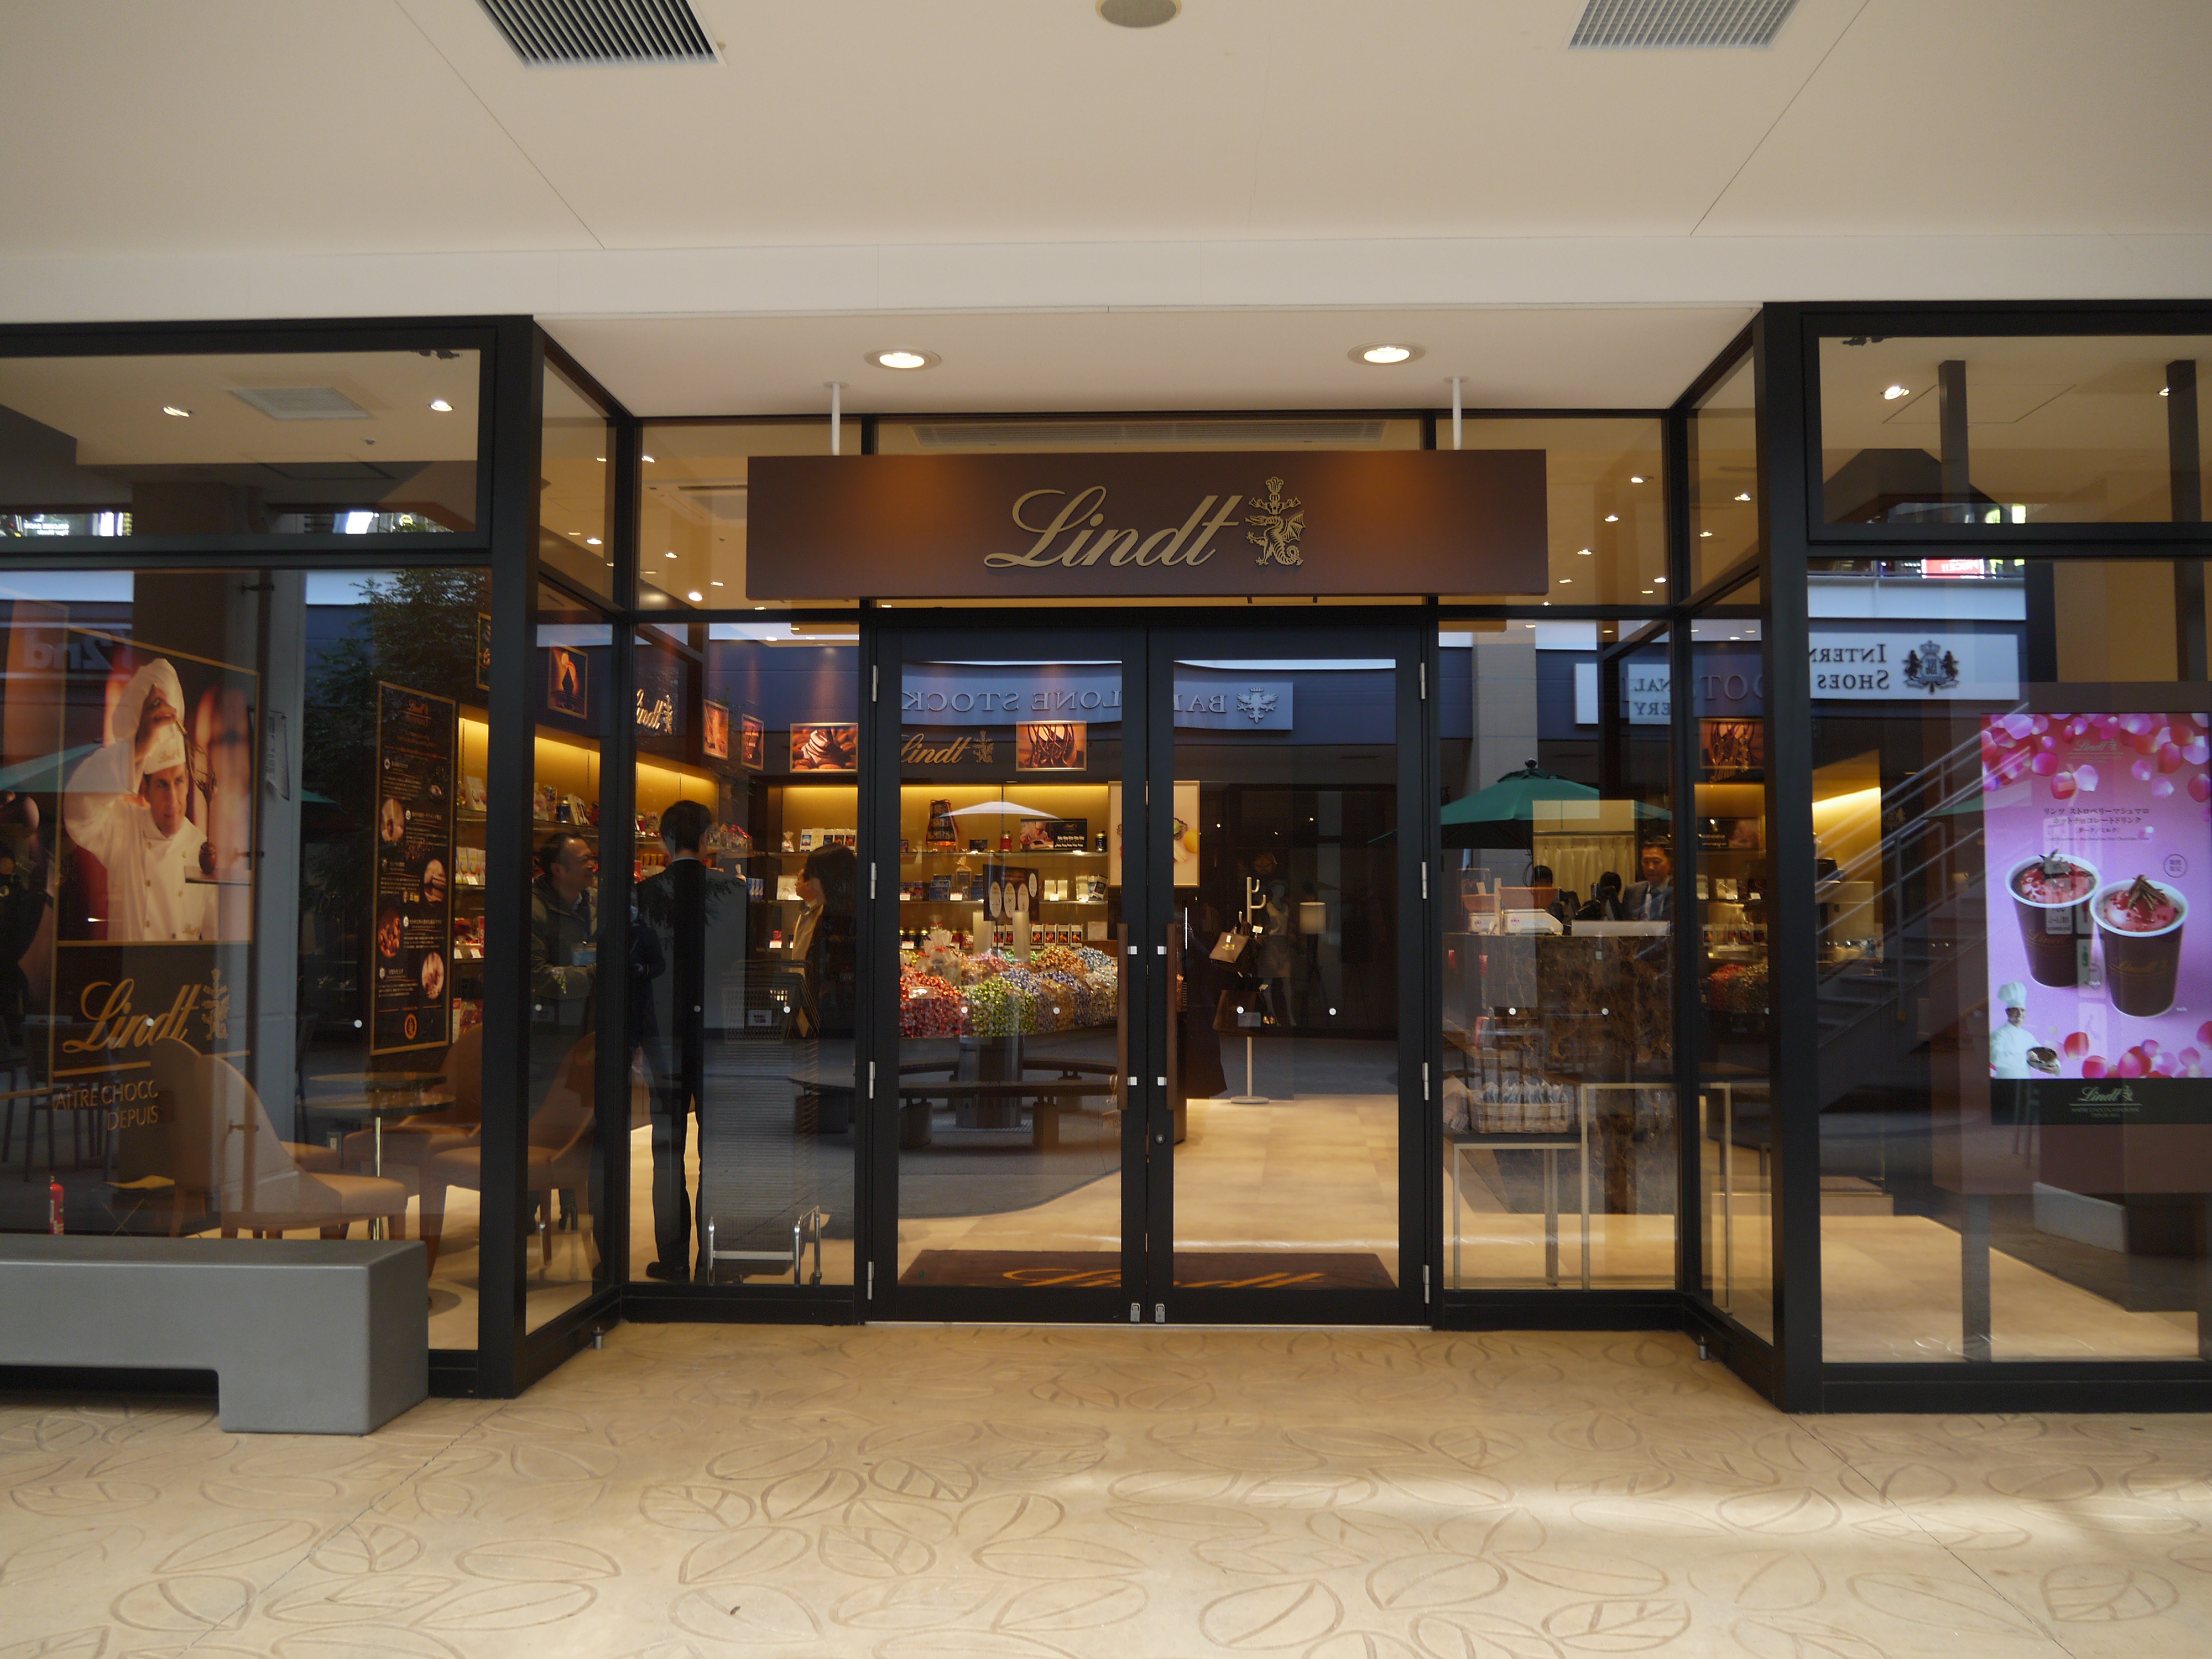 Lindt Chocolat Cafe 三井アウトレットパーク 入間